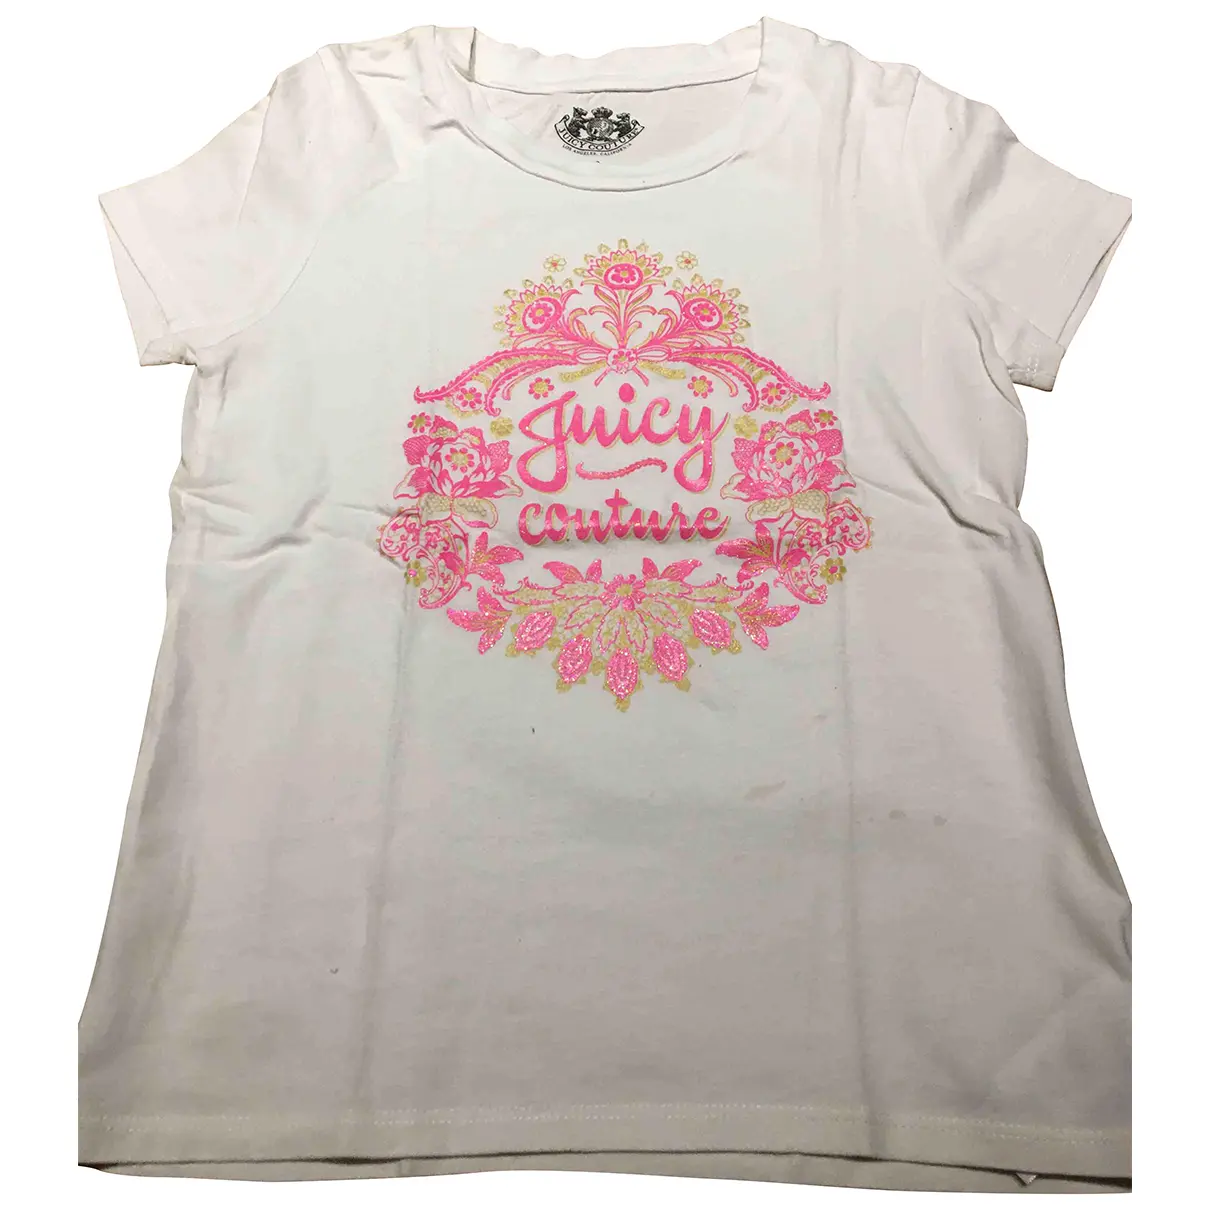 T-shirt Juicy Couture